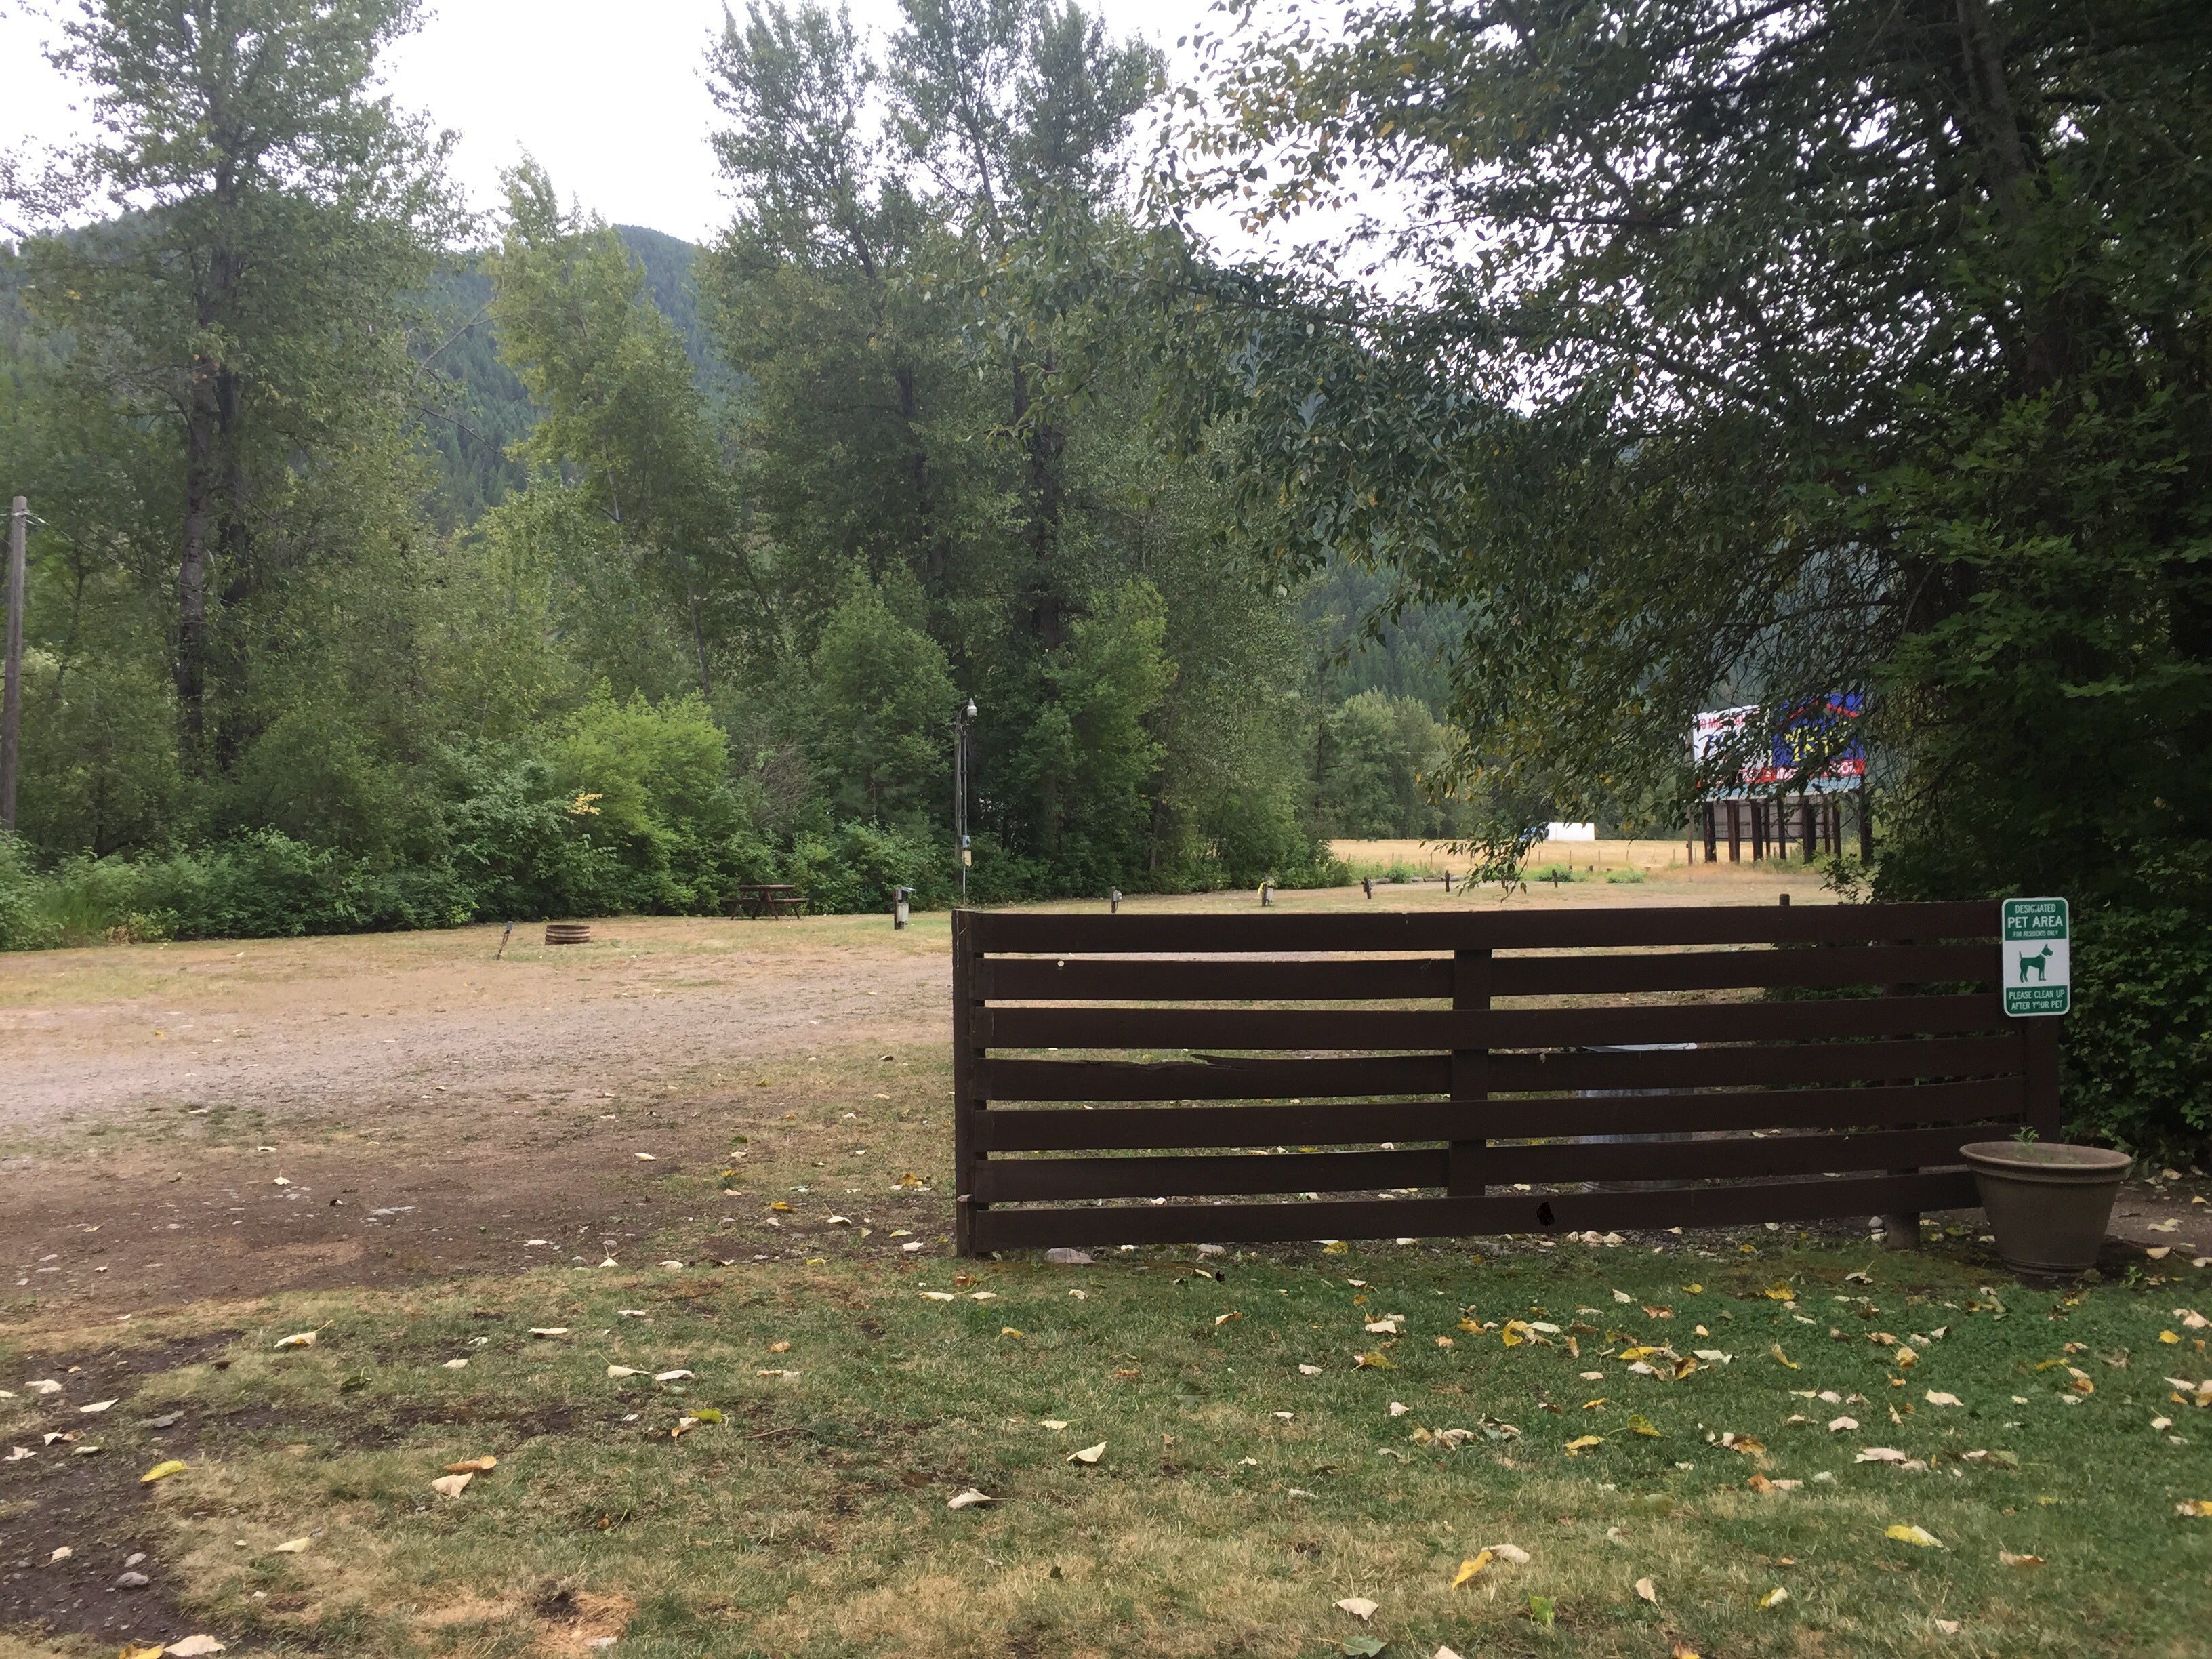 Camper submitted image from Campground St. Regis - 4